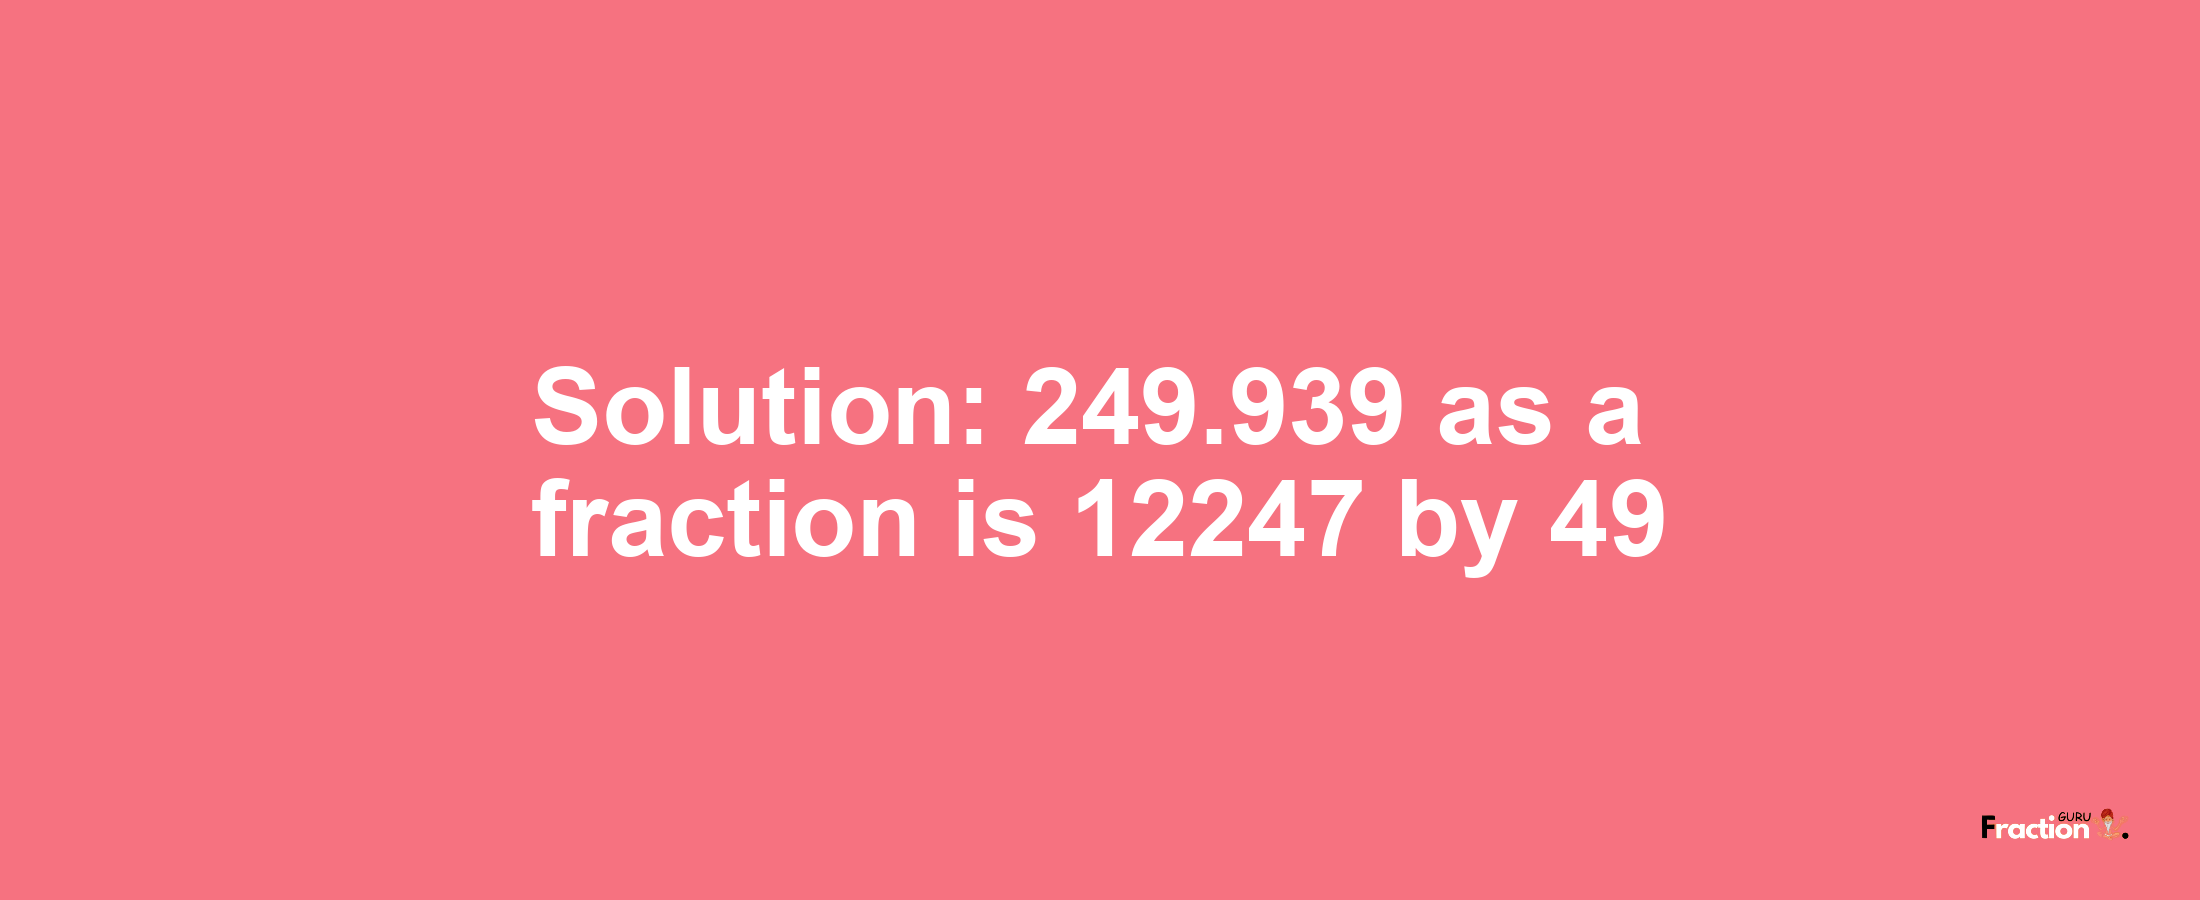 Solution:249.939 as a fraction is 12247/49